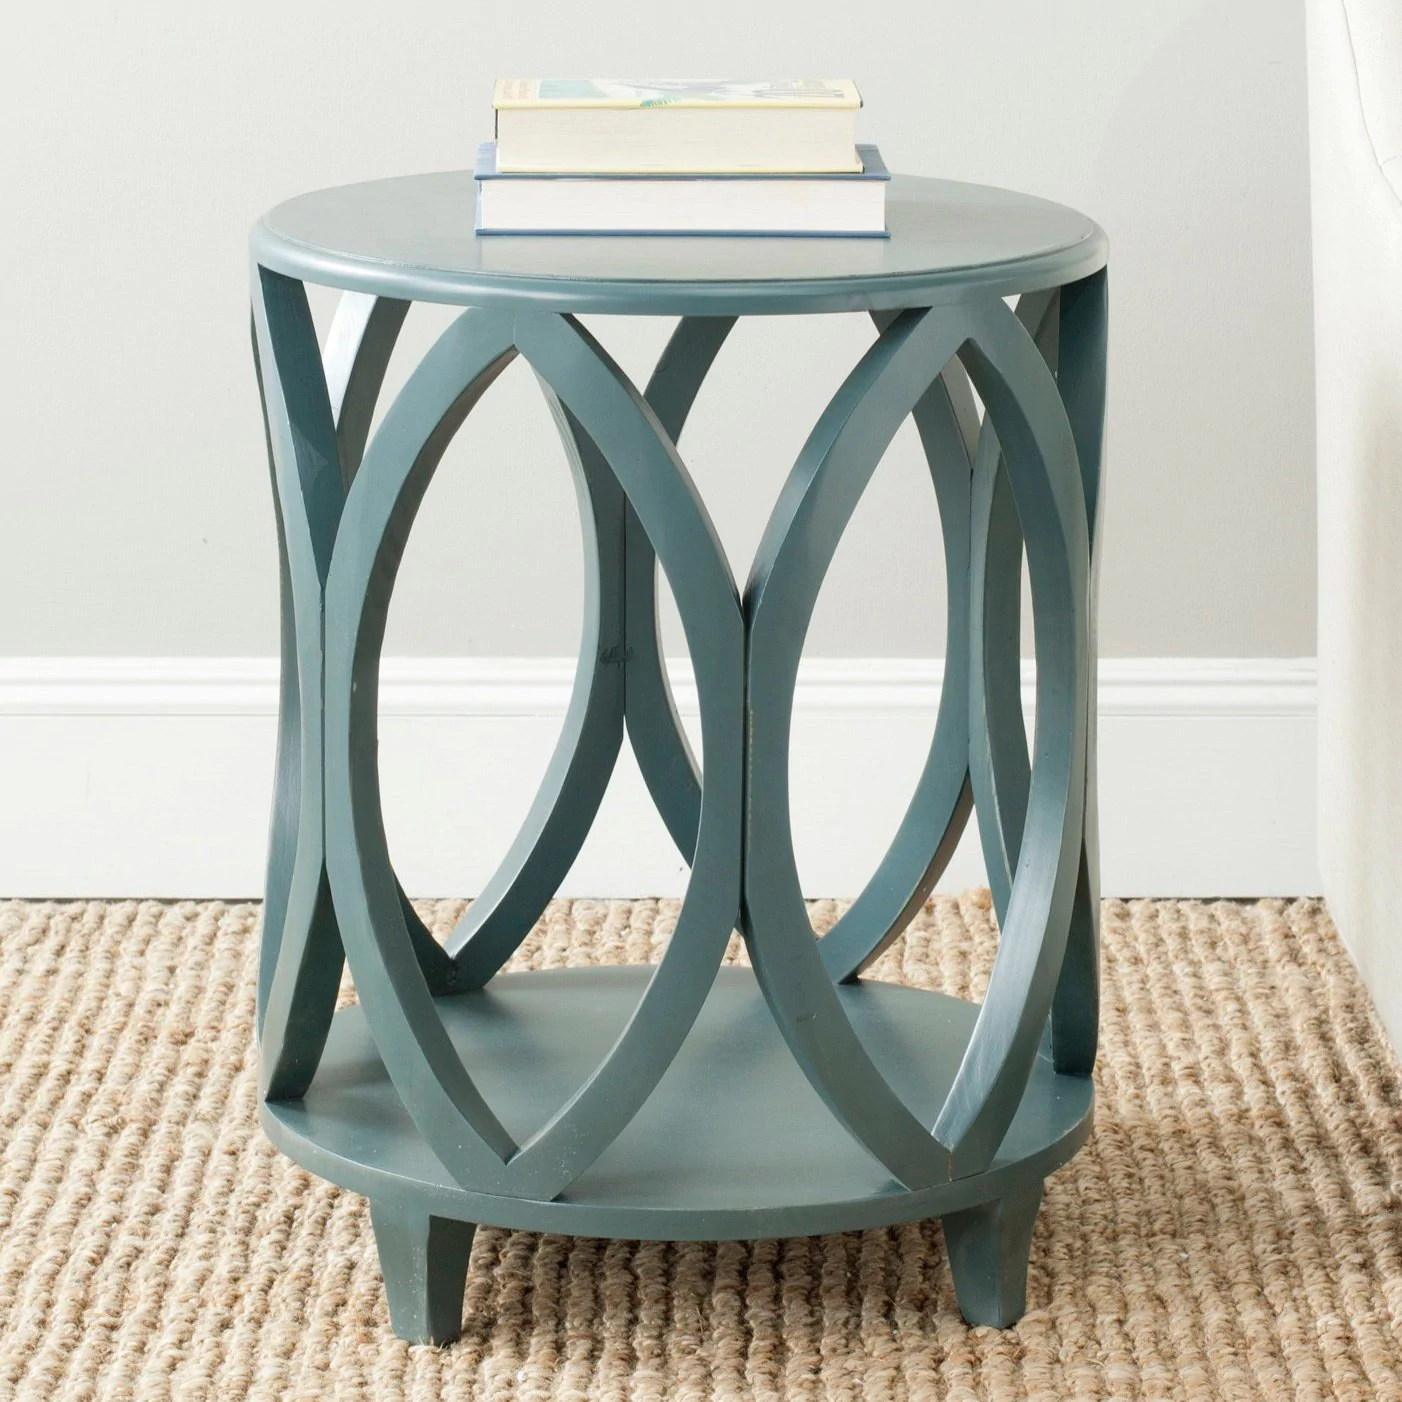 safavieh janika dark teal accent table free shipping today laminate paint white patio clear plastic tablecloth marble and black coffee small mirrored nightstand target makeup